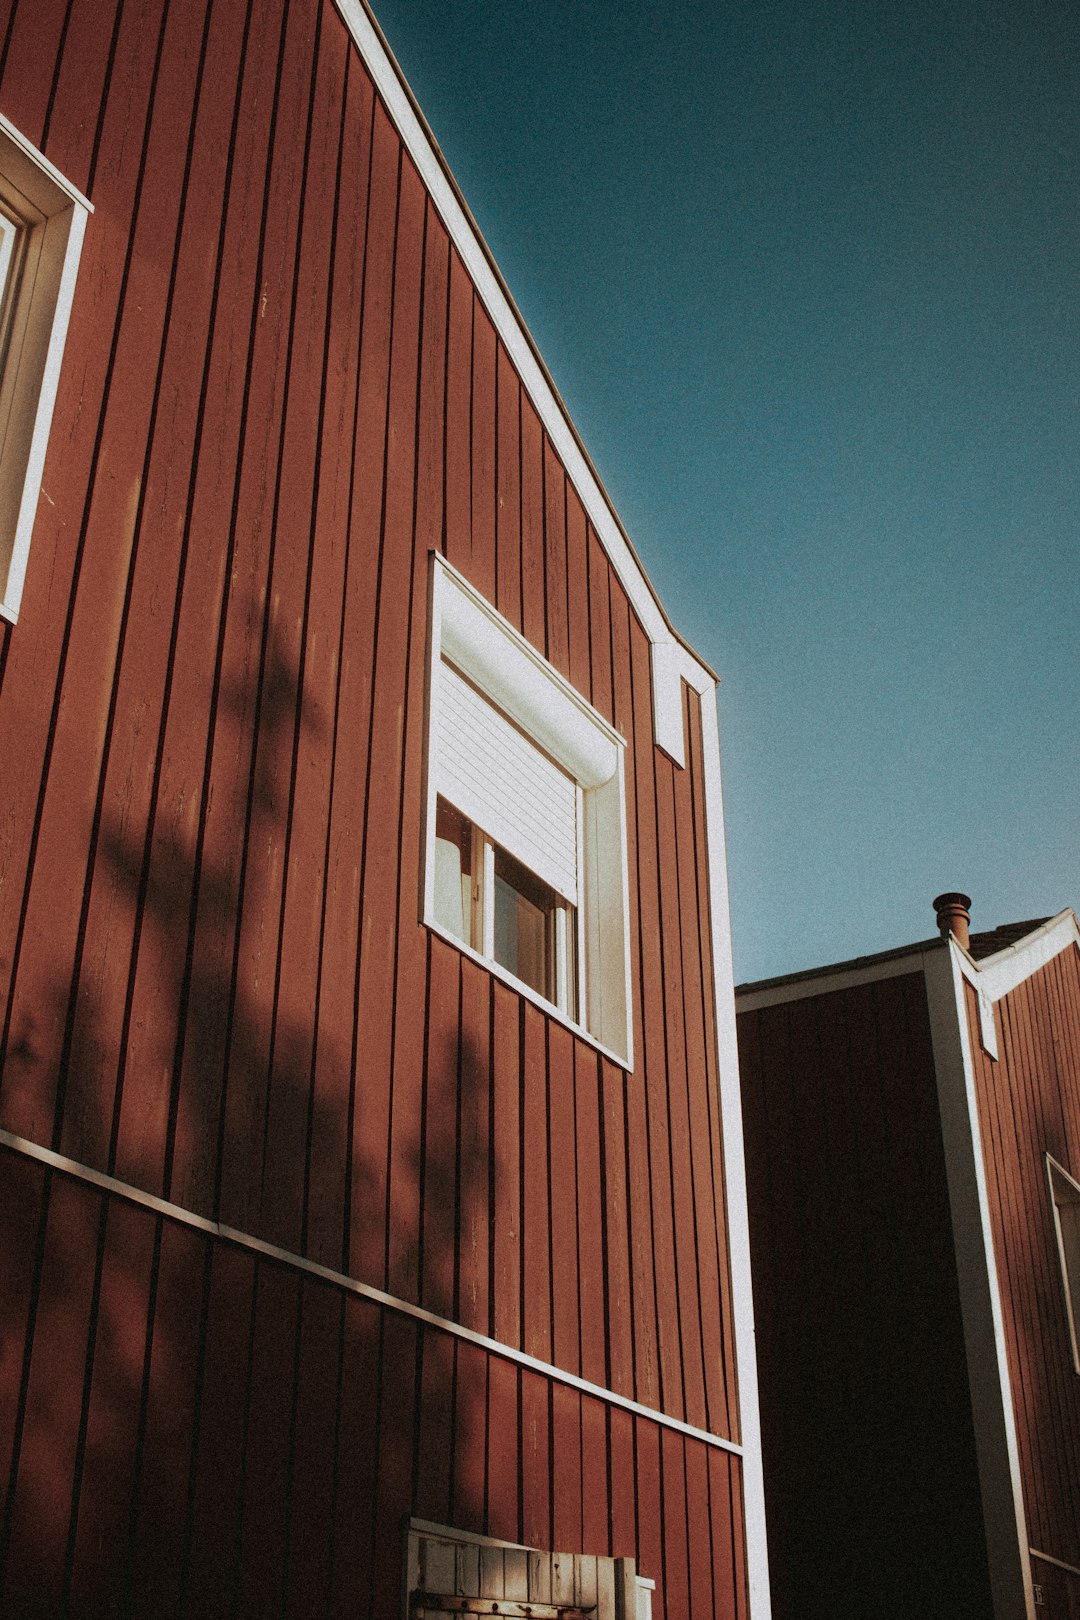 red and white wooden house under blue sky during daytime